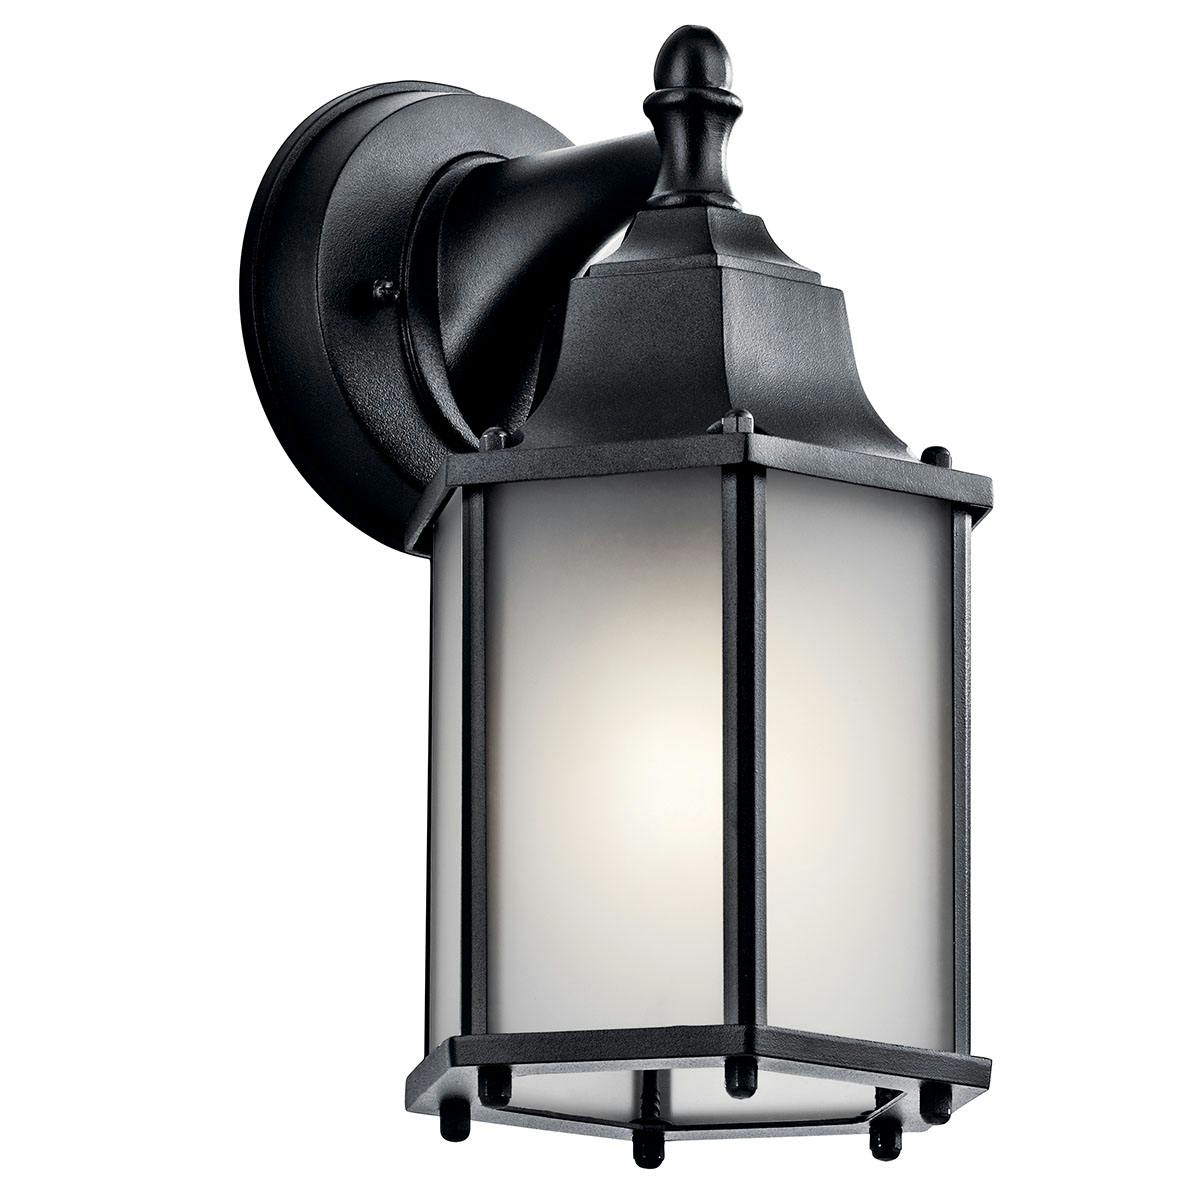 Chesapeake 10.25" Wall Light in Black on a white background